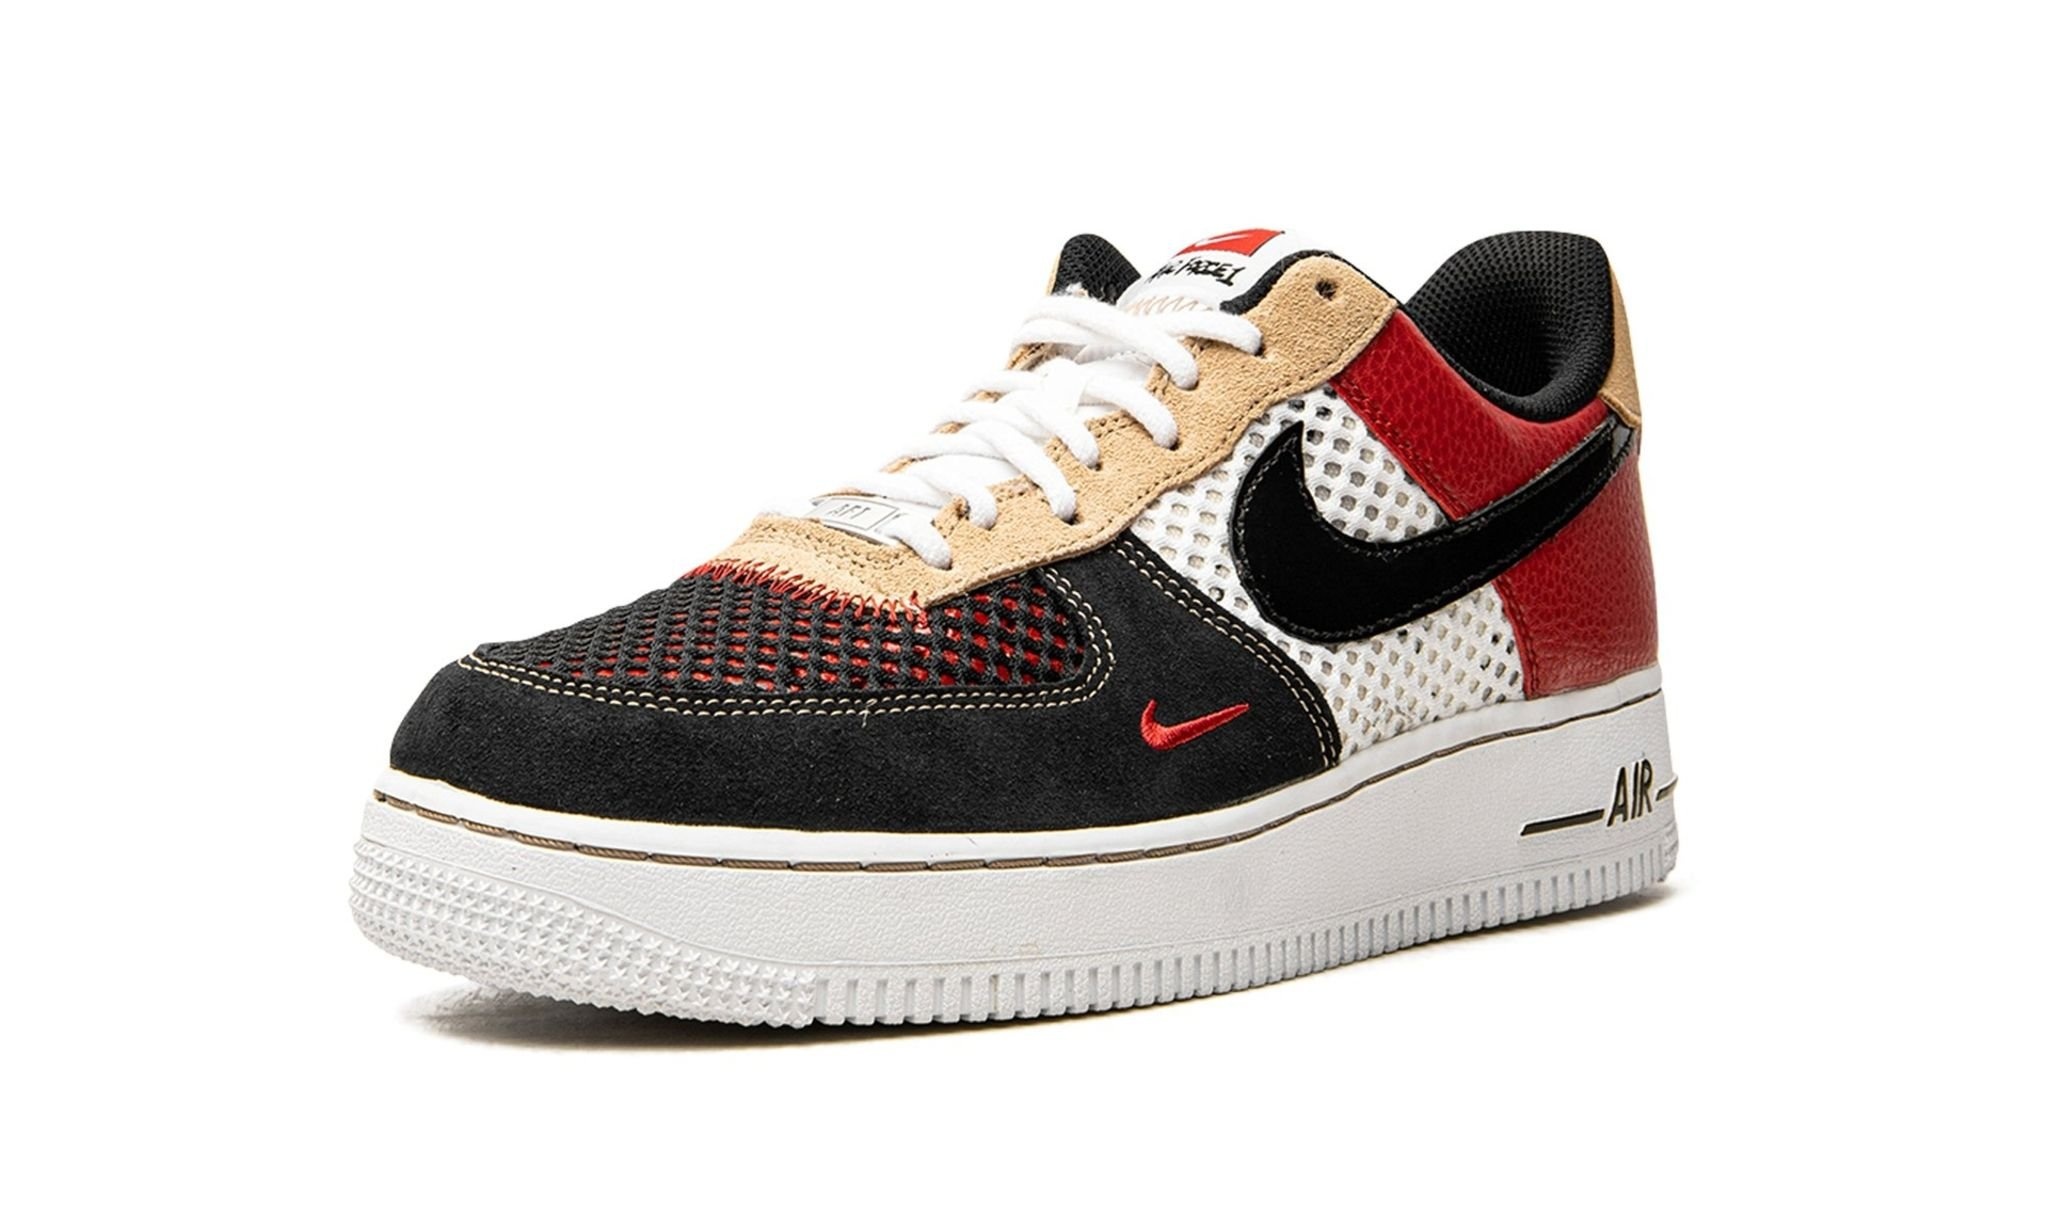 Air Force 1 Low "Alter and Reveal" - 4